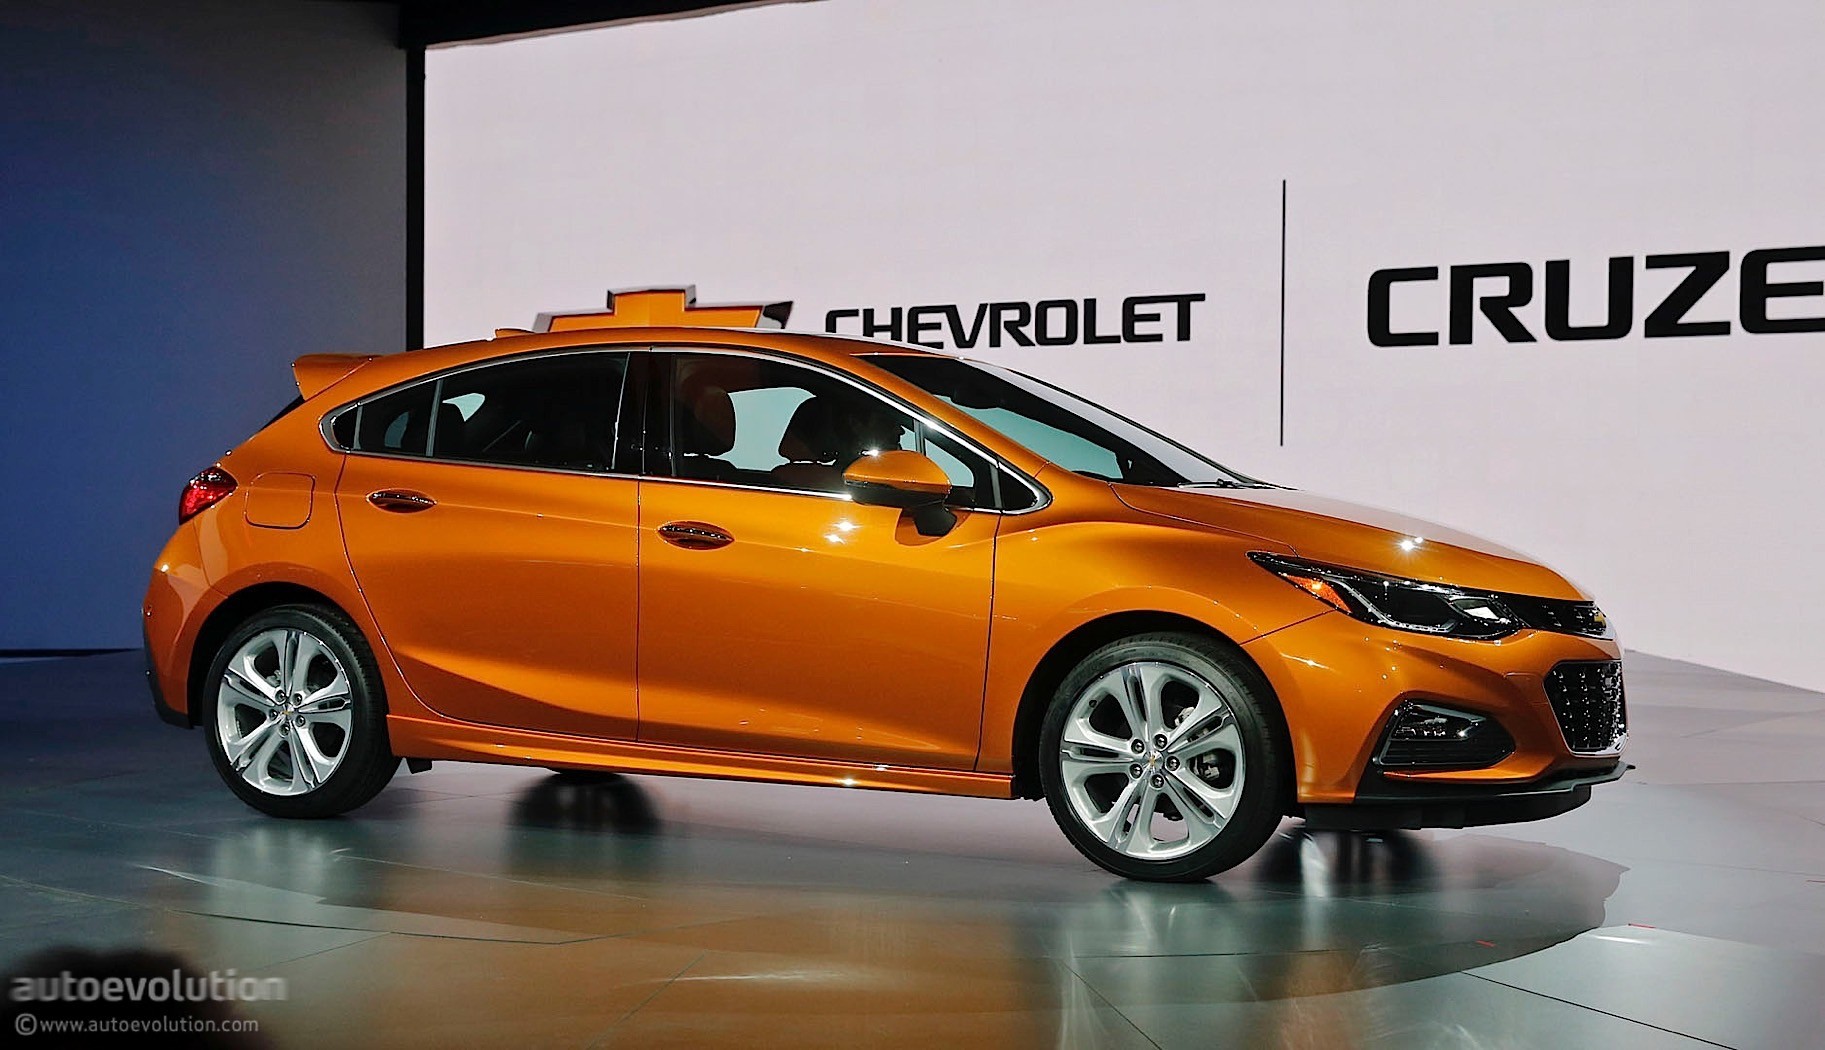 2017 chevy cruze review hints at hatchback comeback in america_7